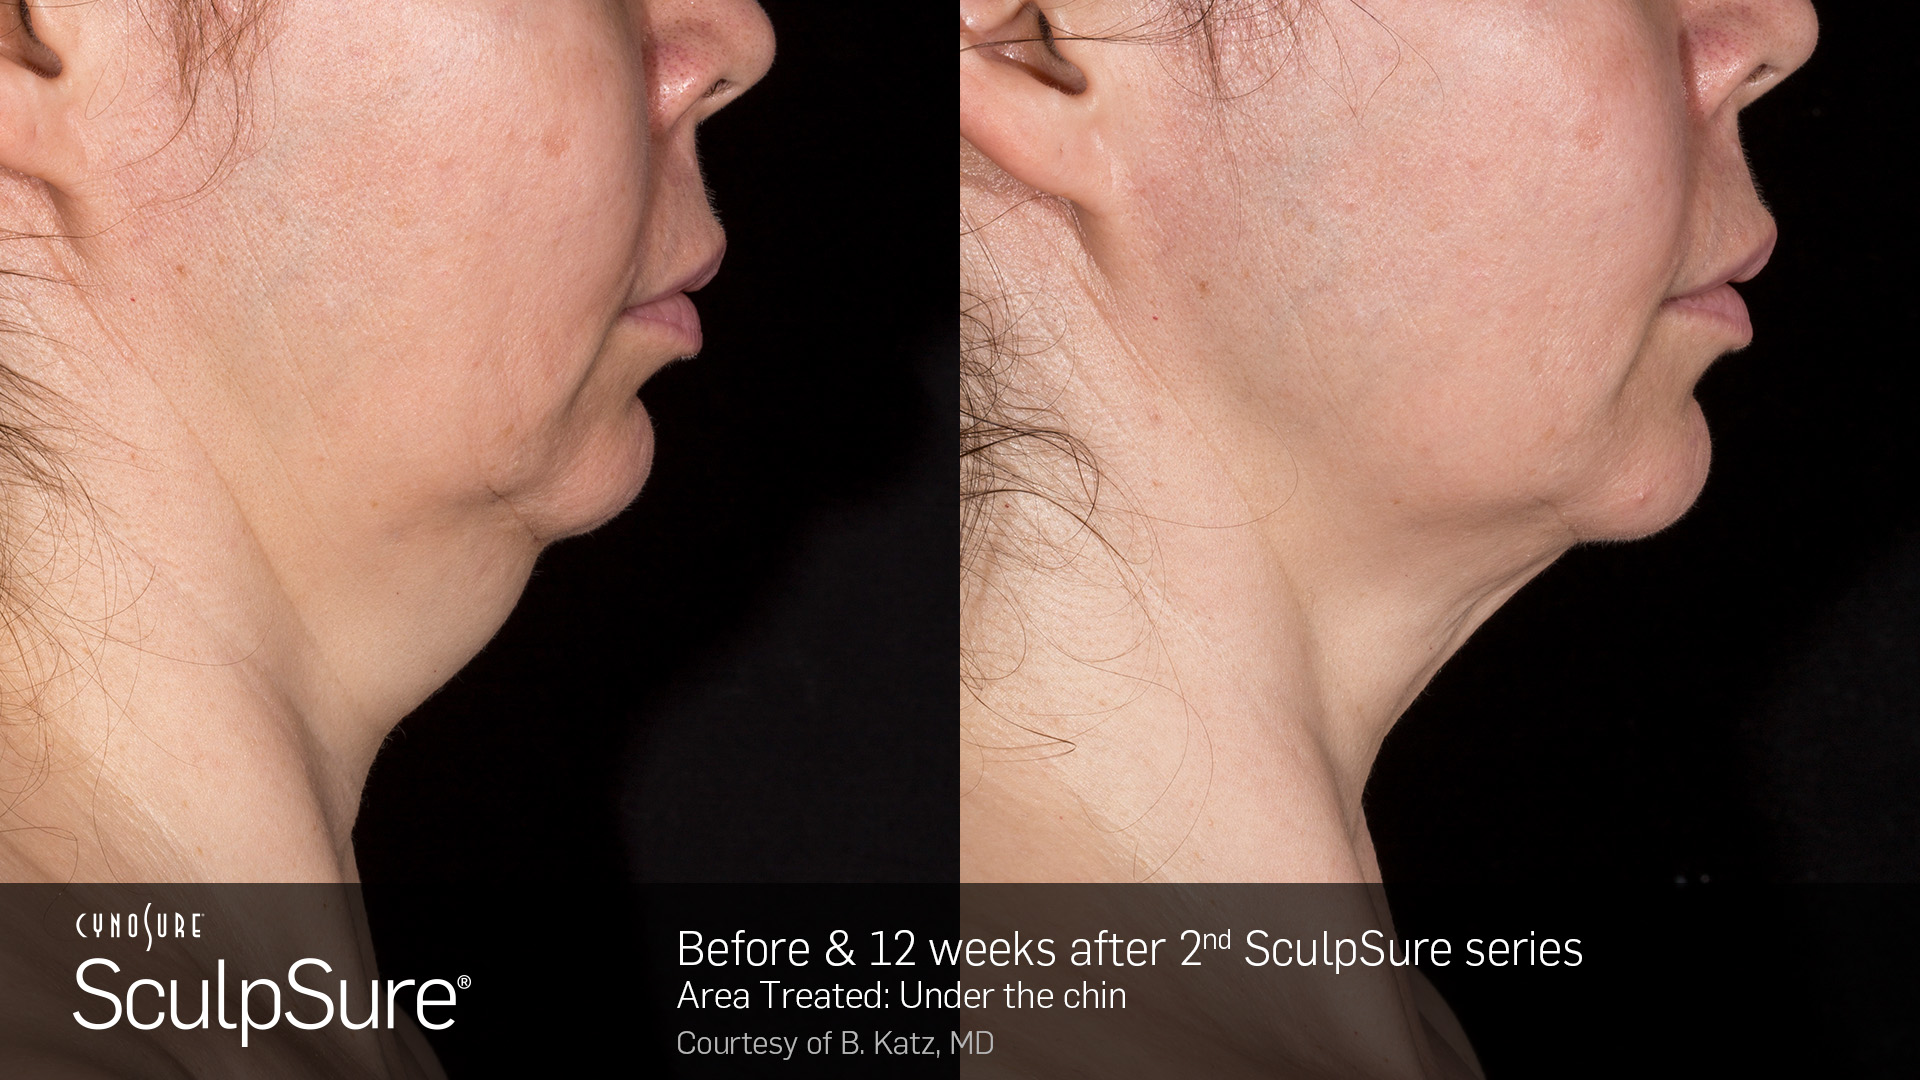 Before and after Sculpsure